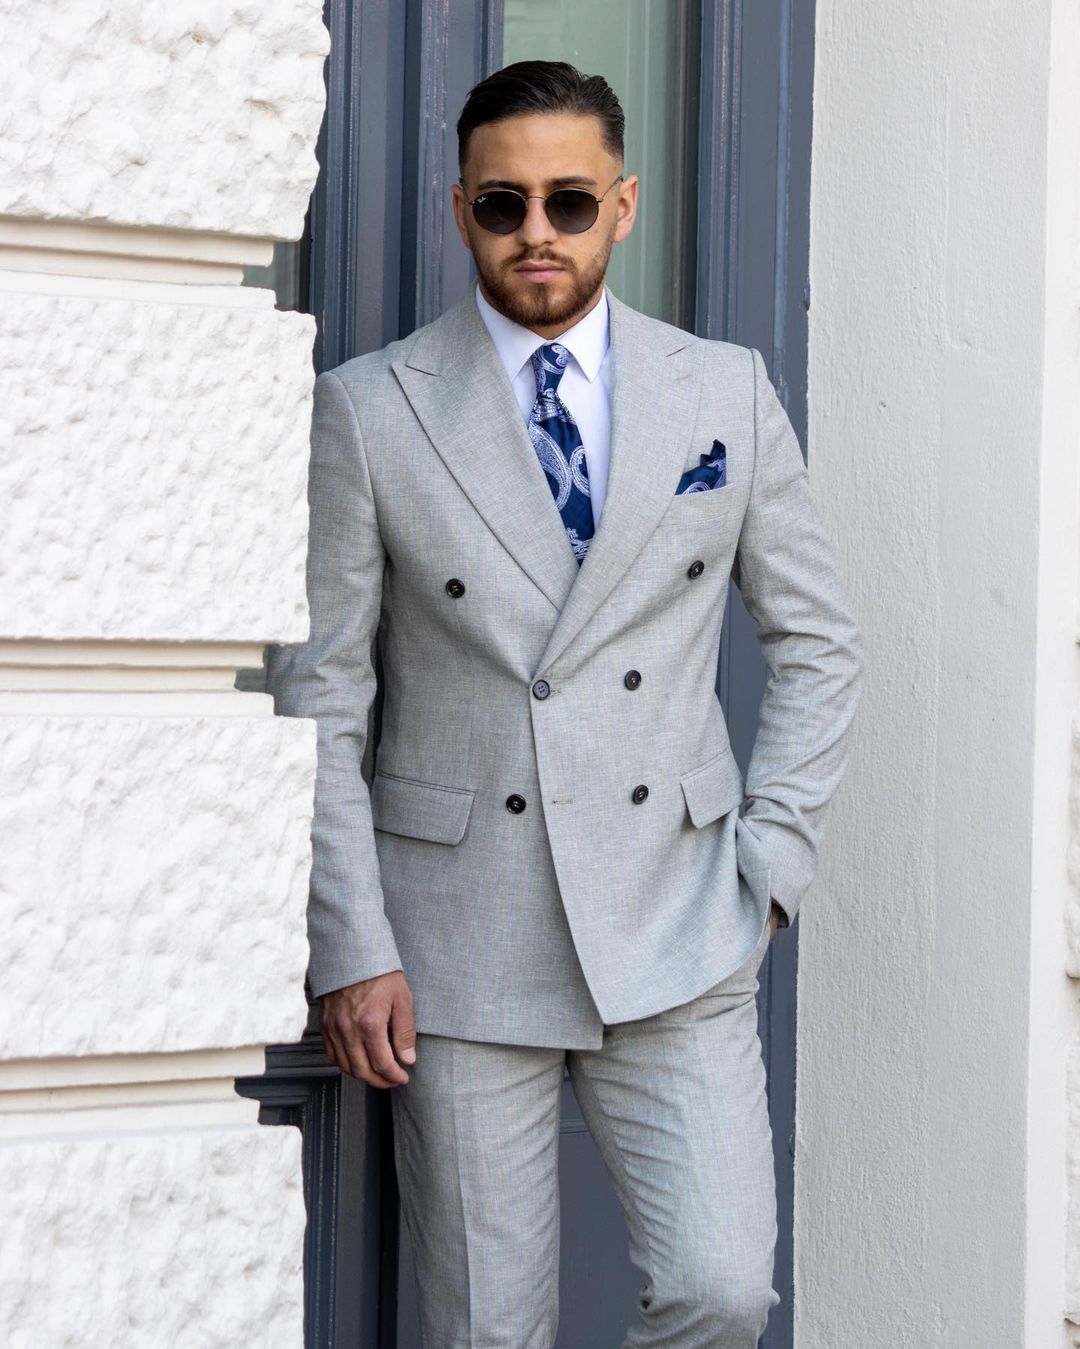 17 Types of Suits for Men: Any Time, Any Place, Anywhere - Hairstyle